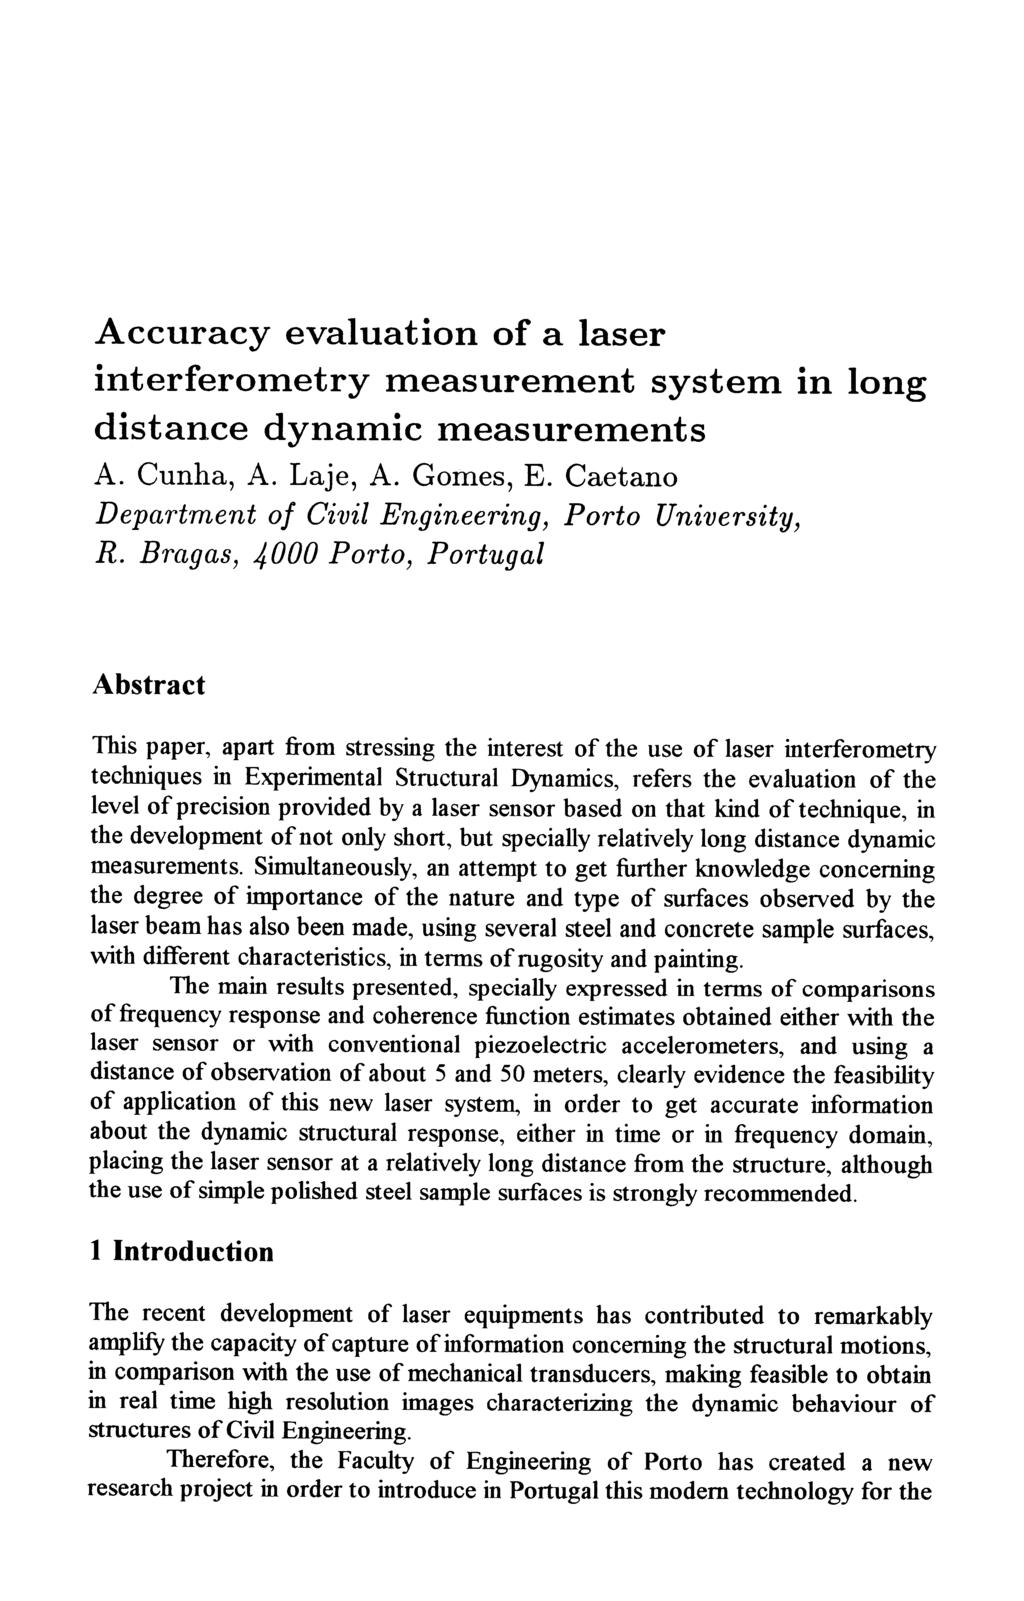 Accuracy evaluation of a laser interferometry measurement system in long distance dynamic measurements A. Cunha, A. Laje, A. Gomes, E. Caetano Department of Civil Engineering, Porto University, R.